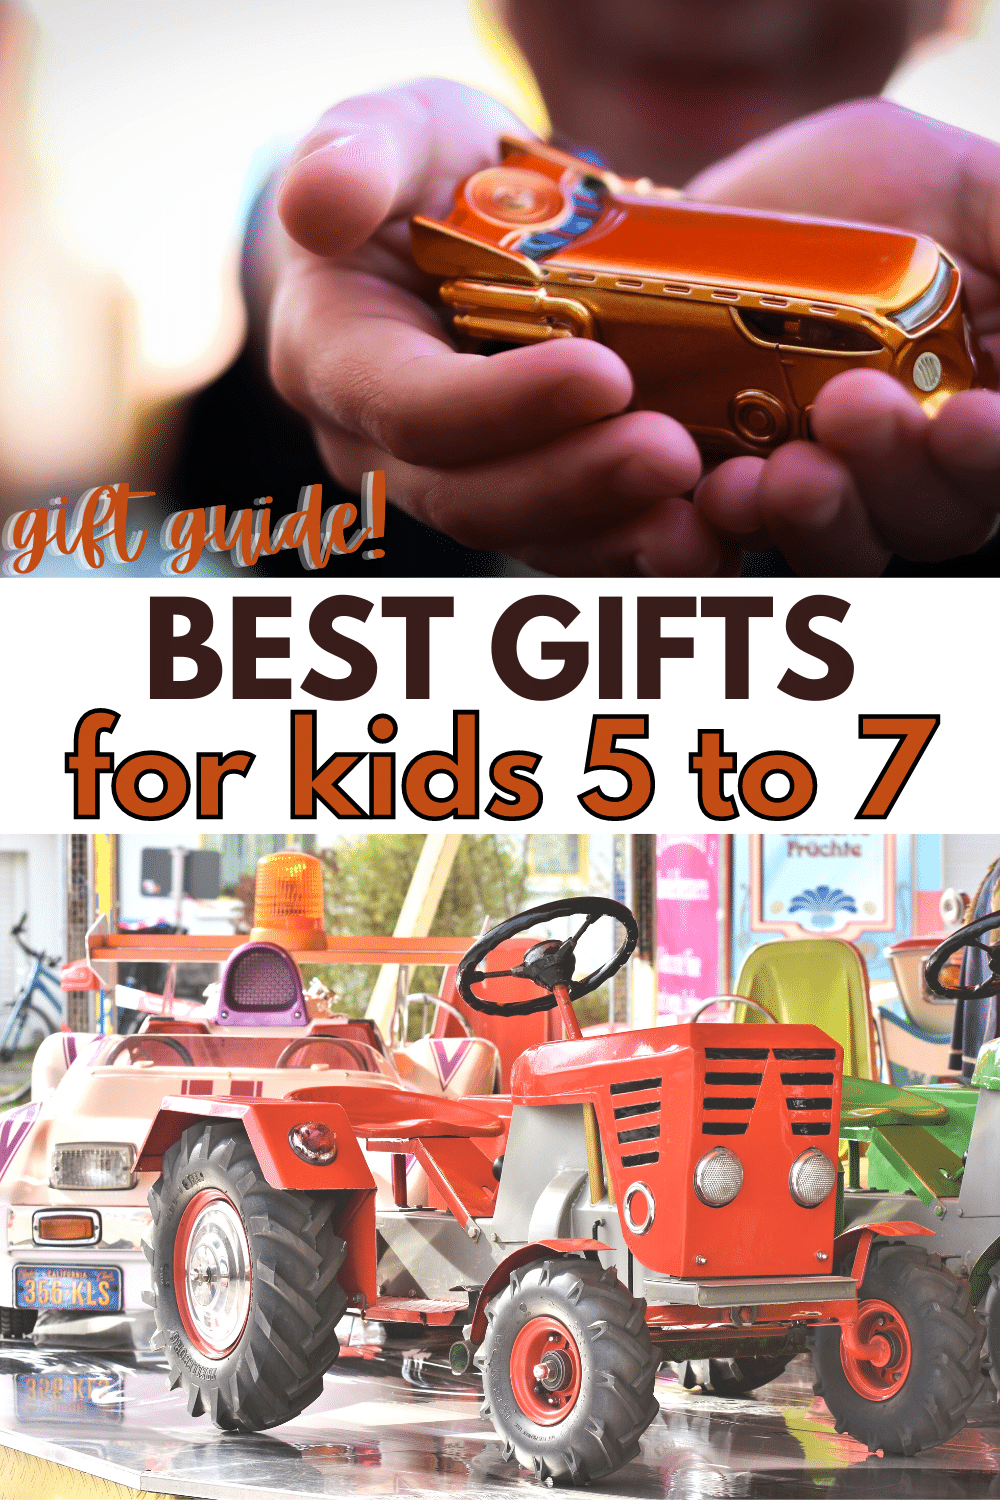 There are plenty of great gifts that early elementary kids flip for that they can play with their friends. Here's some of the best gifts for kids 5-7. #giftguide #giftideas #forkids #earlyelementary via @wondermomwannab